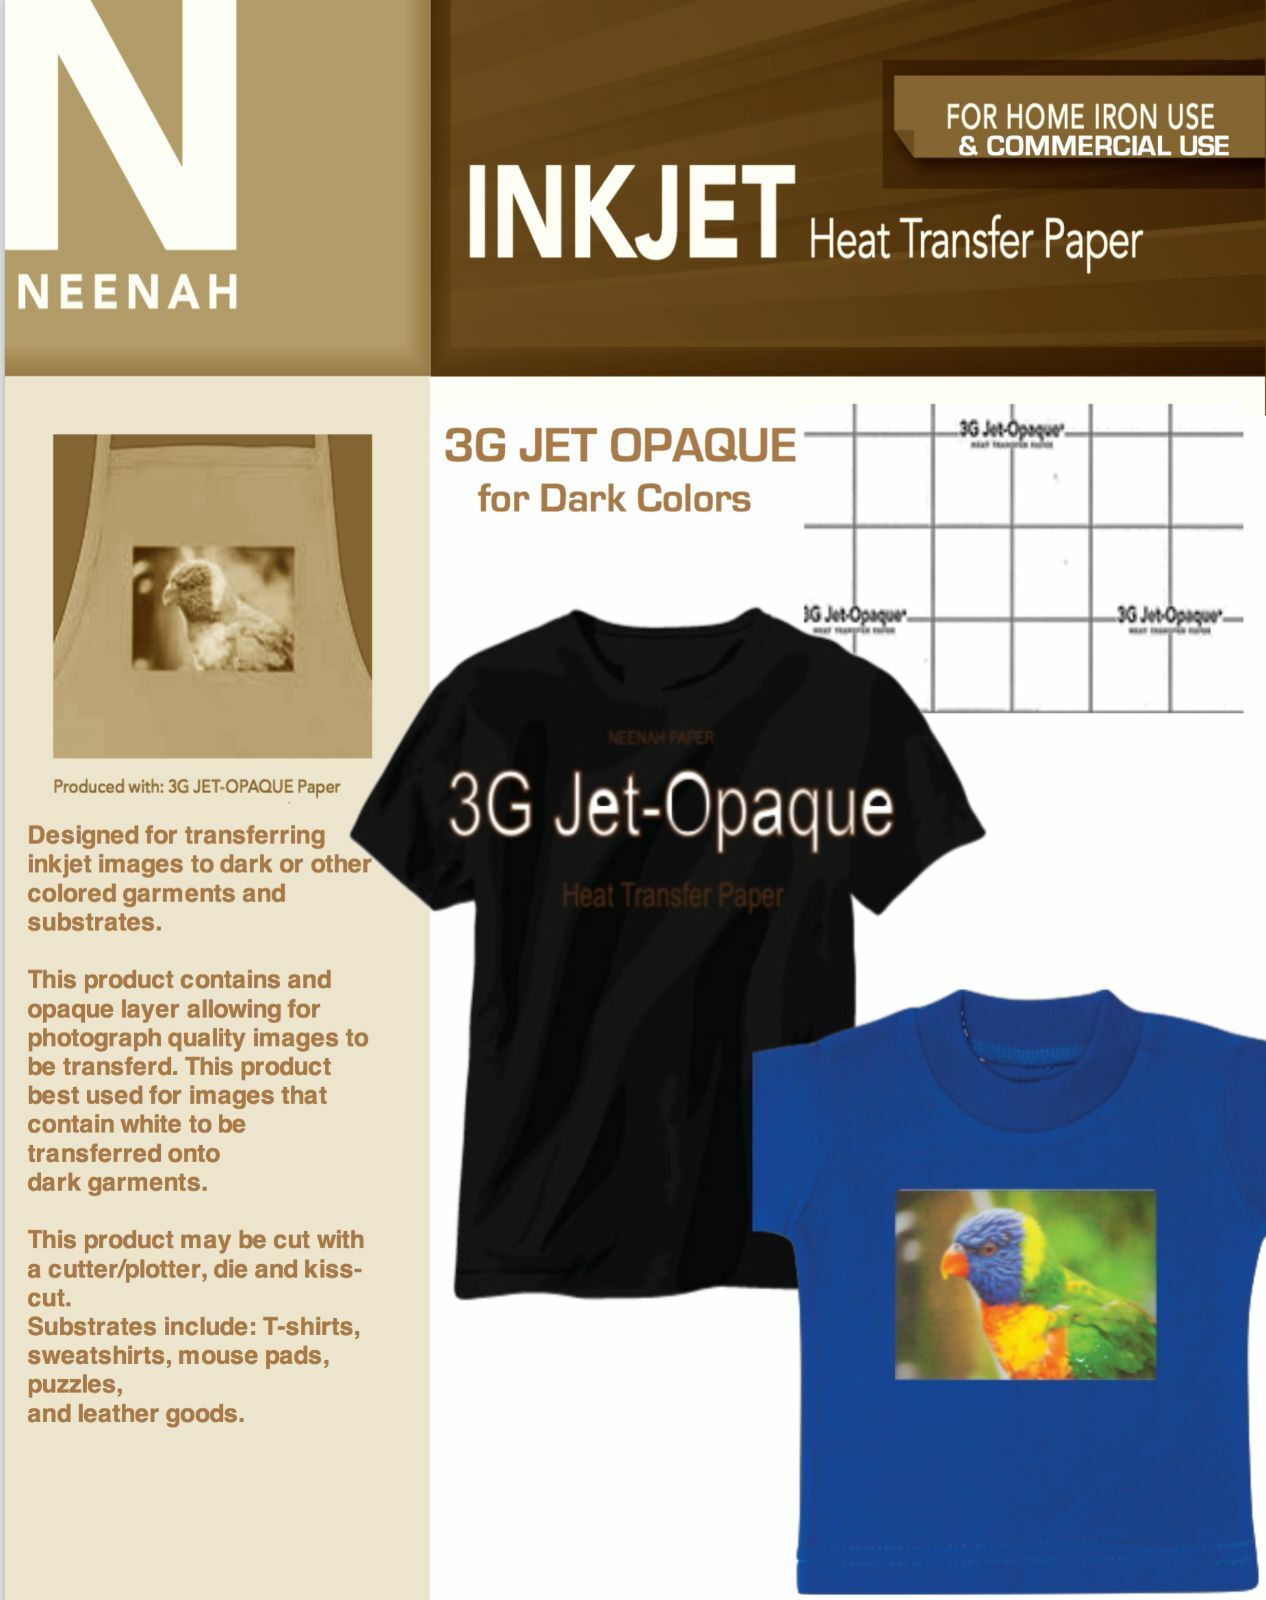 Neenah 3g Jet Opaque Heat Transfer Paper For Dark Colors 8.5x11 (25 Sheets)